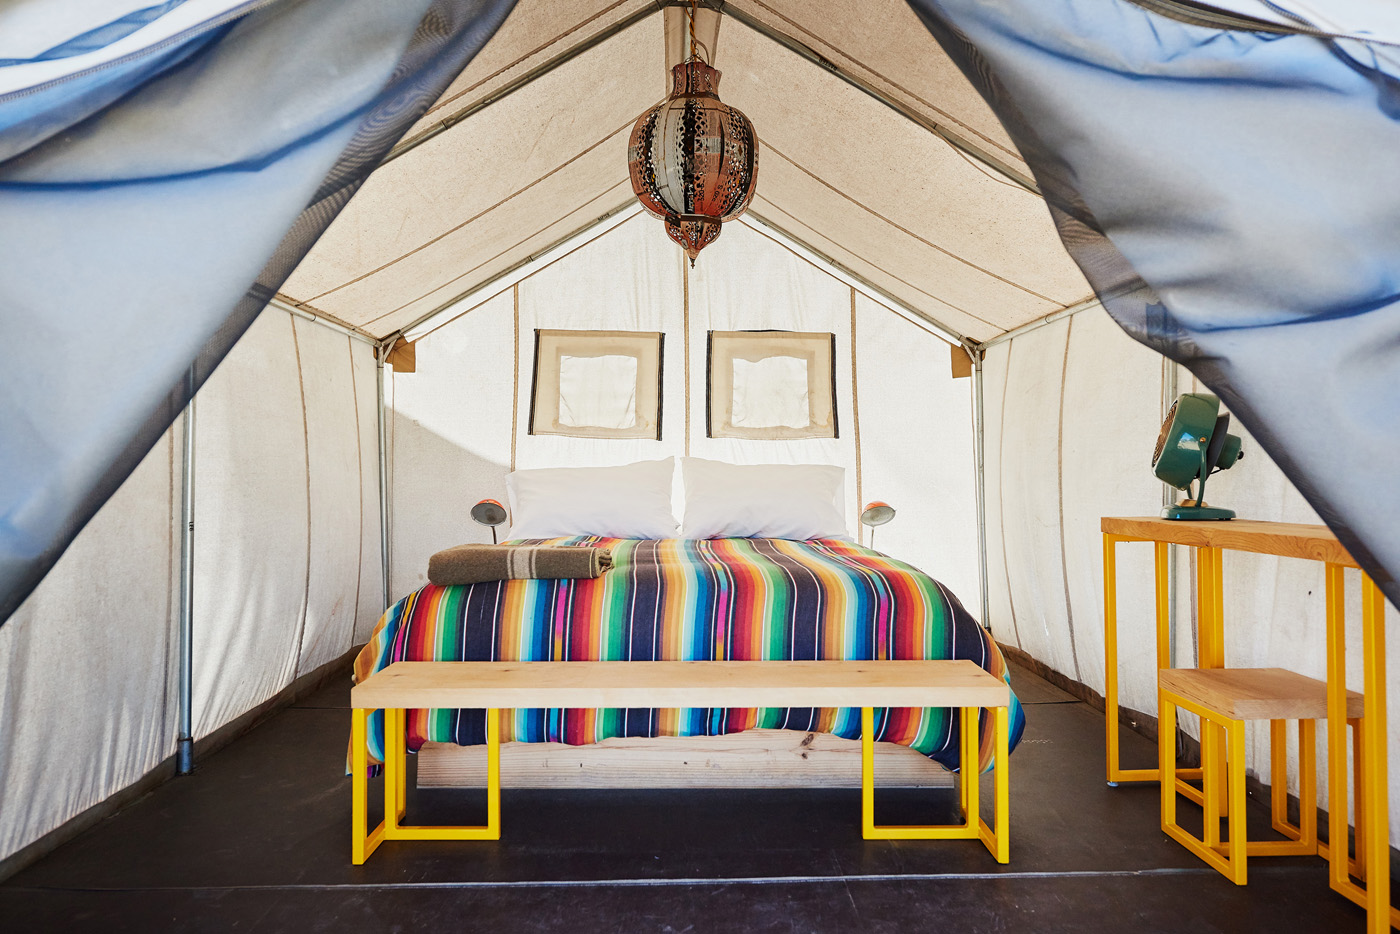 Glamping Tents Make You Feel at Home on the Range